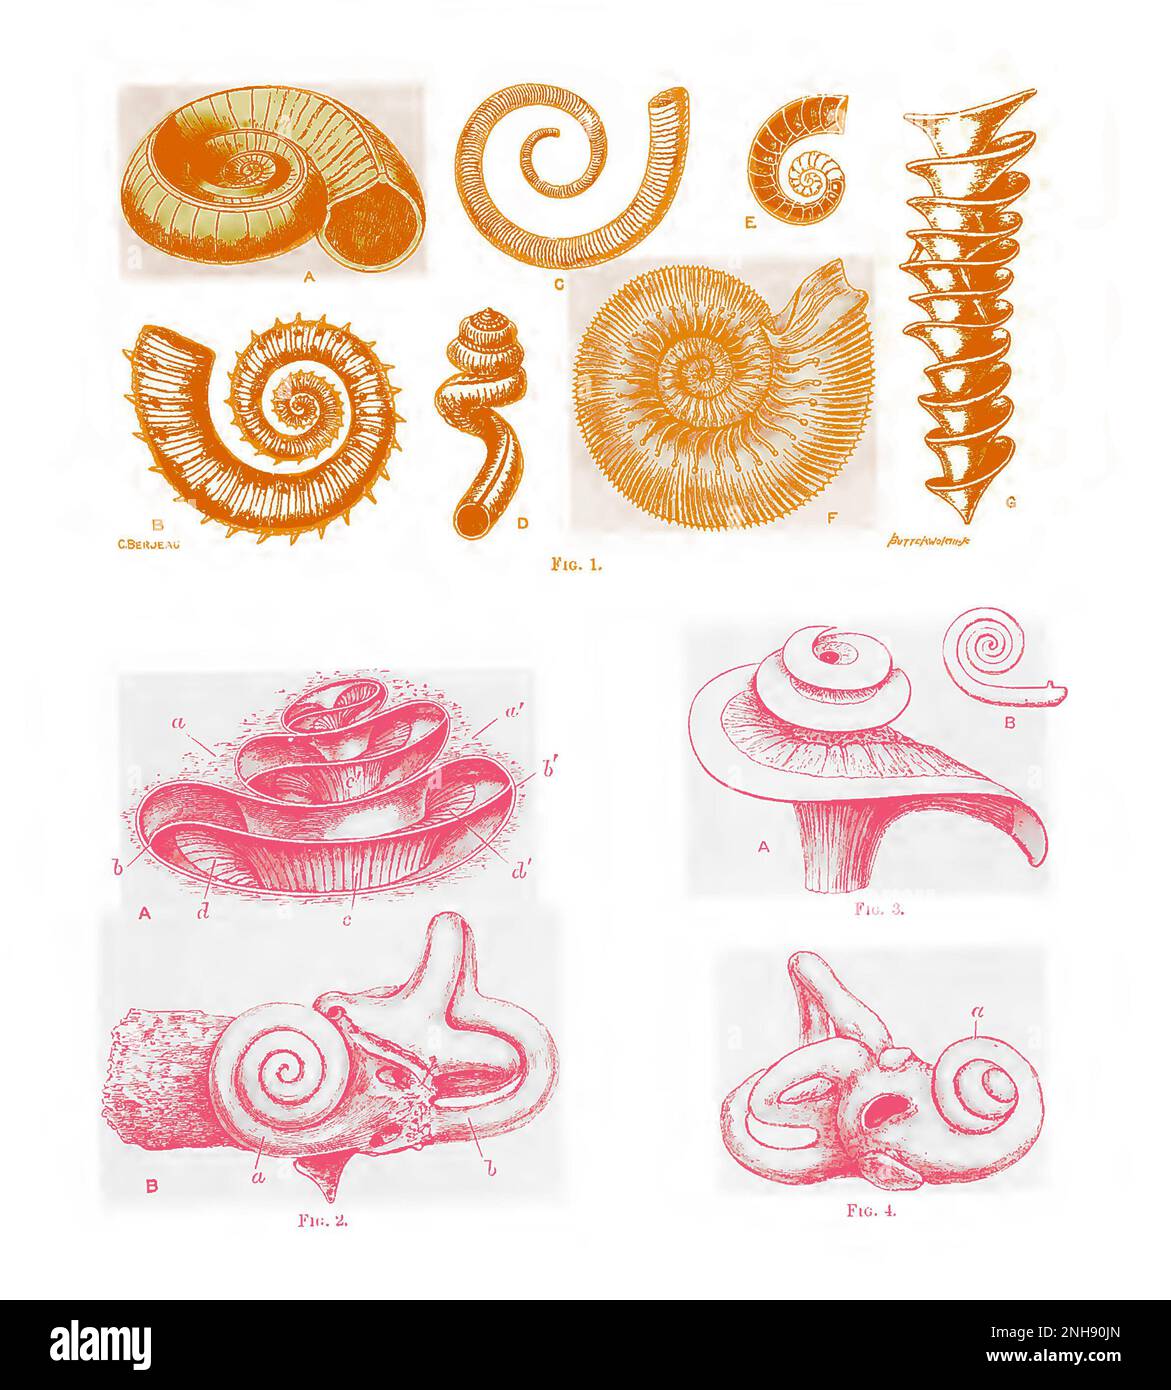 Illustration of spiral shell formations (Figure 1), including: (1A) Euomphalus pentangulatus; (1B) Crioceras emeriri; (1C) Ecculiomphalus distans; (1D) Siliquaria anguina; (1F) Stephanoceras humphresianum ammonite; and (1G) Axis of Archimedes wortheri, and their resemblance to similar spiral formations in portions of the human inner ear (Figures 2, 3, 4), including: (2A) cochlea; (2B) osseous labyrinth of left internal ear seen from without; (3) laminae of cochlea; and (4) bony labyrinth of right internal ear of child. From Design in Nature by J. Bell Pettigrew, 1908. Colorized. Stock Photo